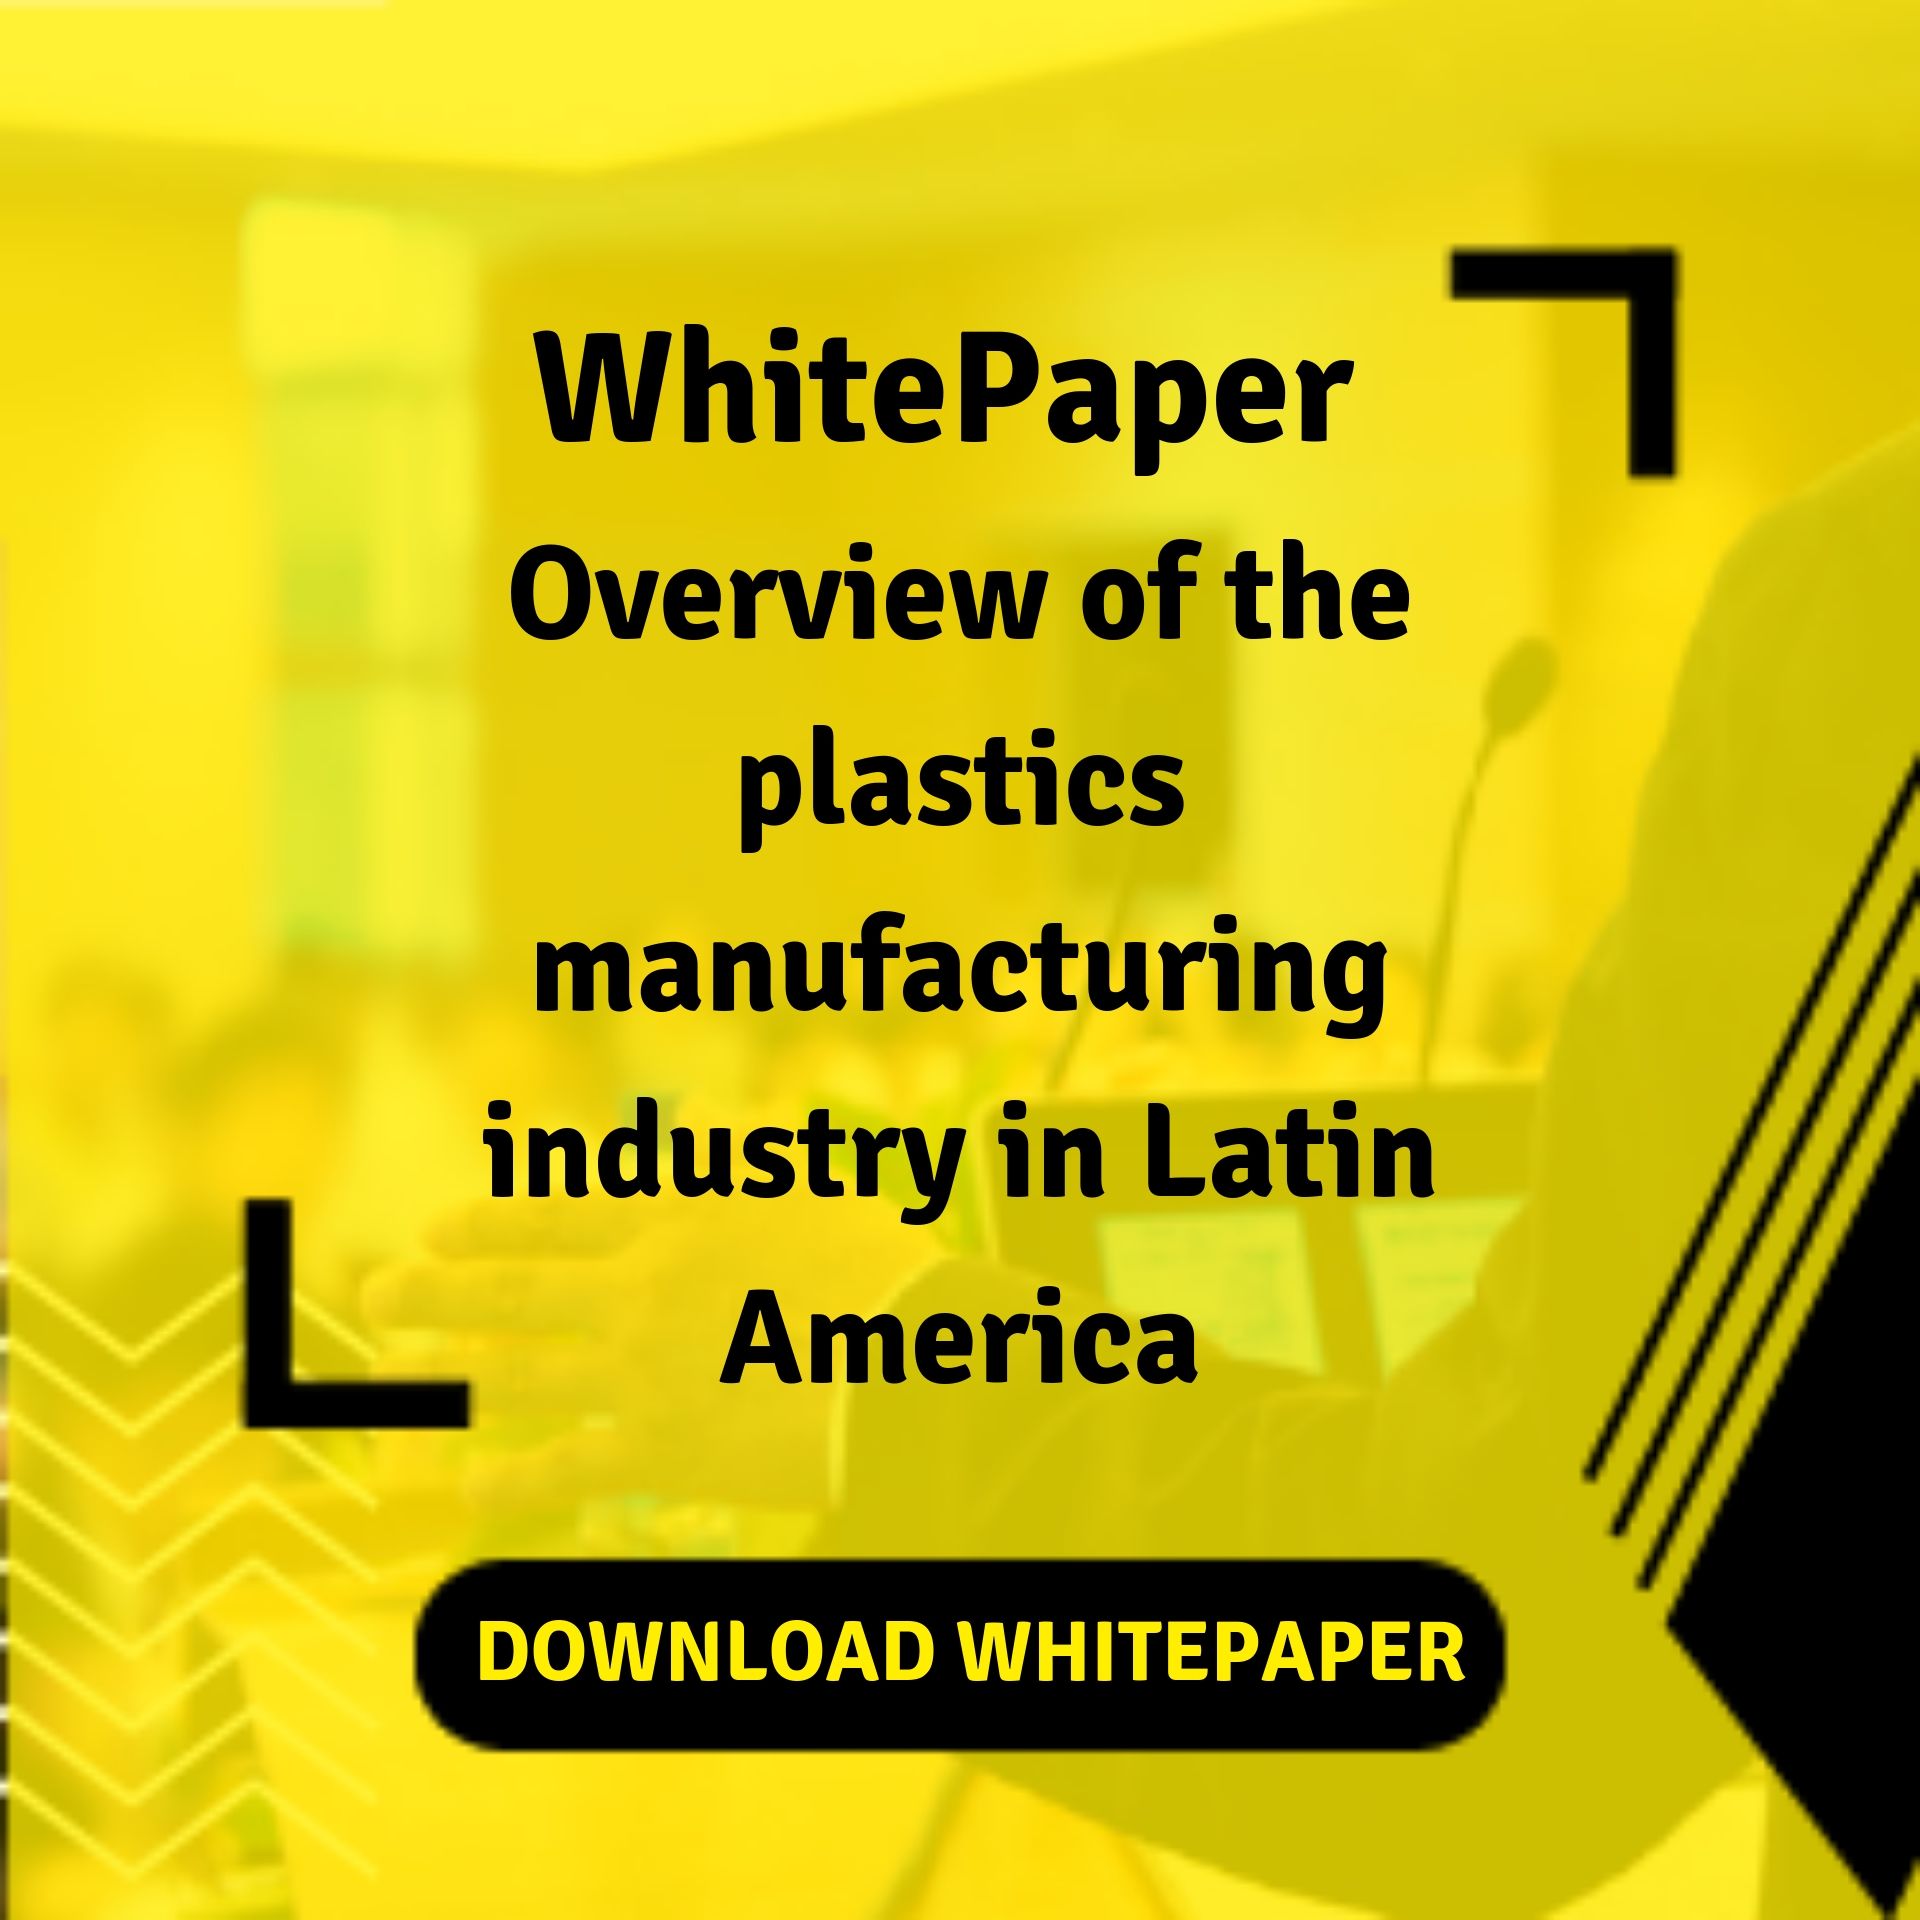 WhitePaper Overview of the plastics industry in Latin America (1)